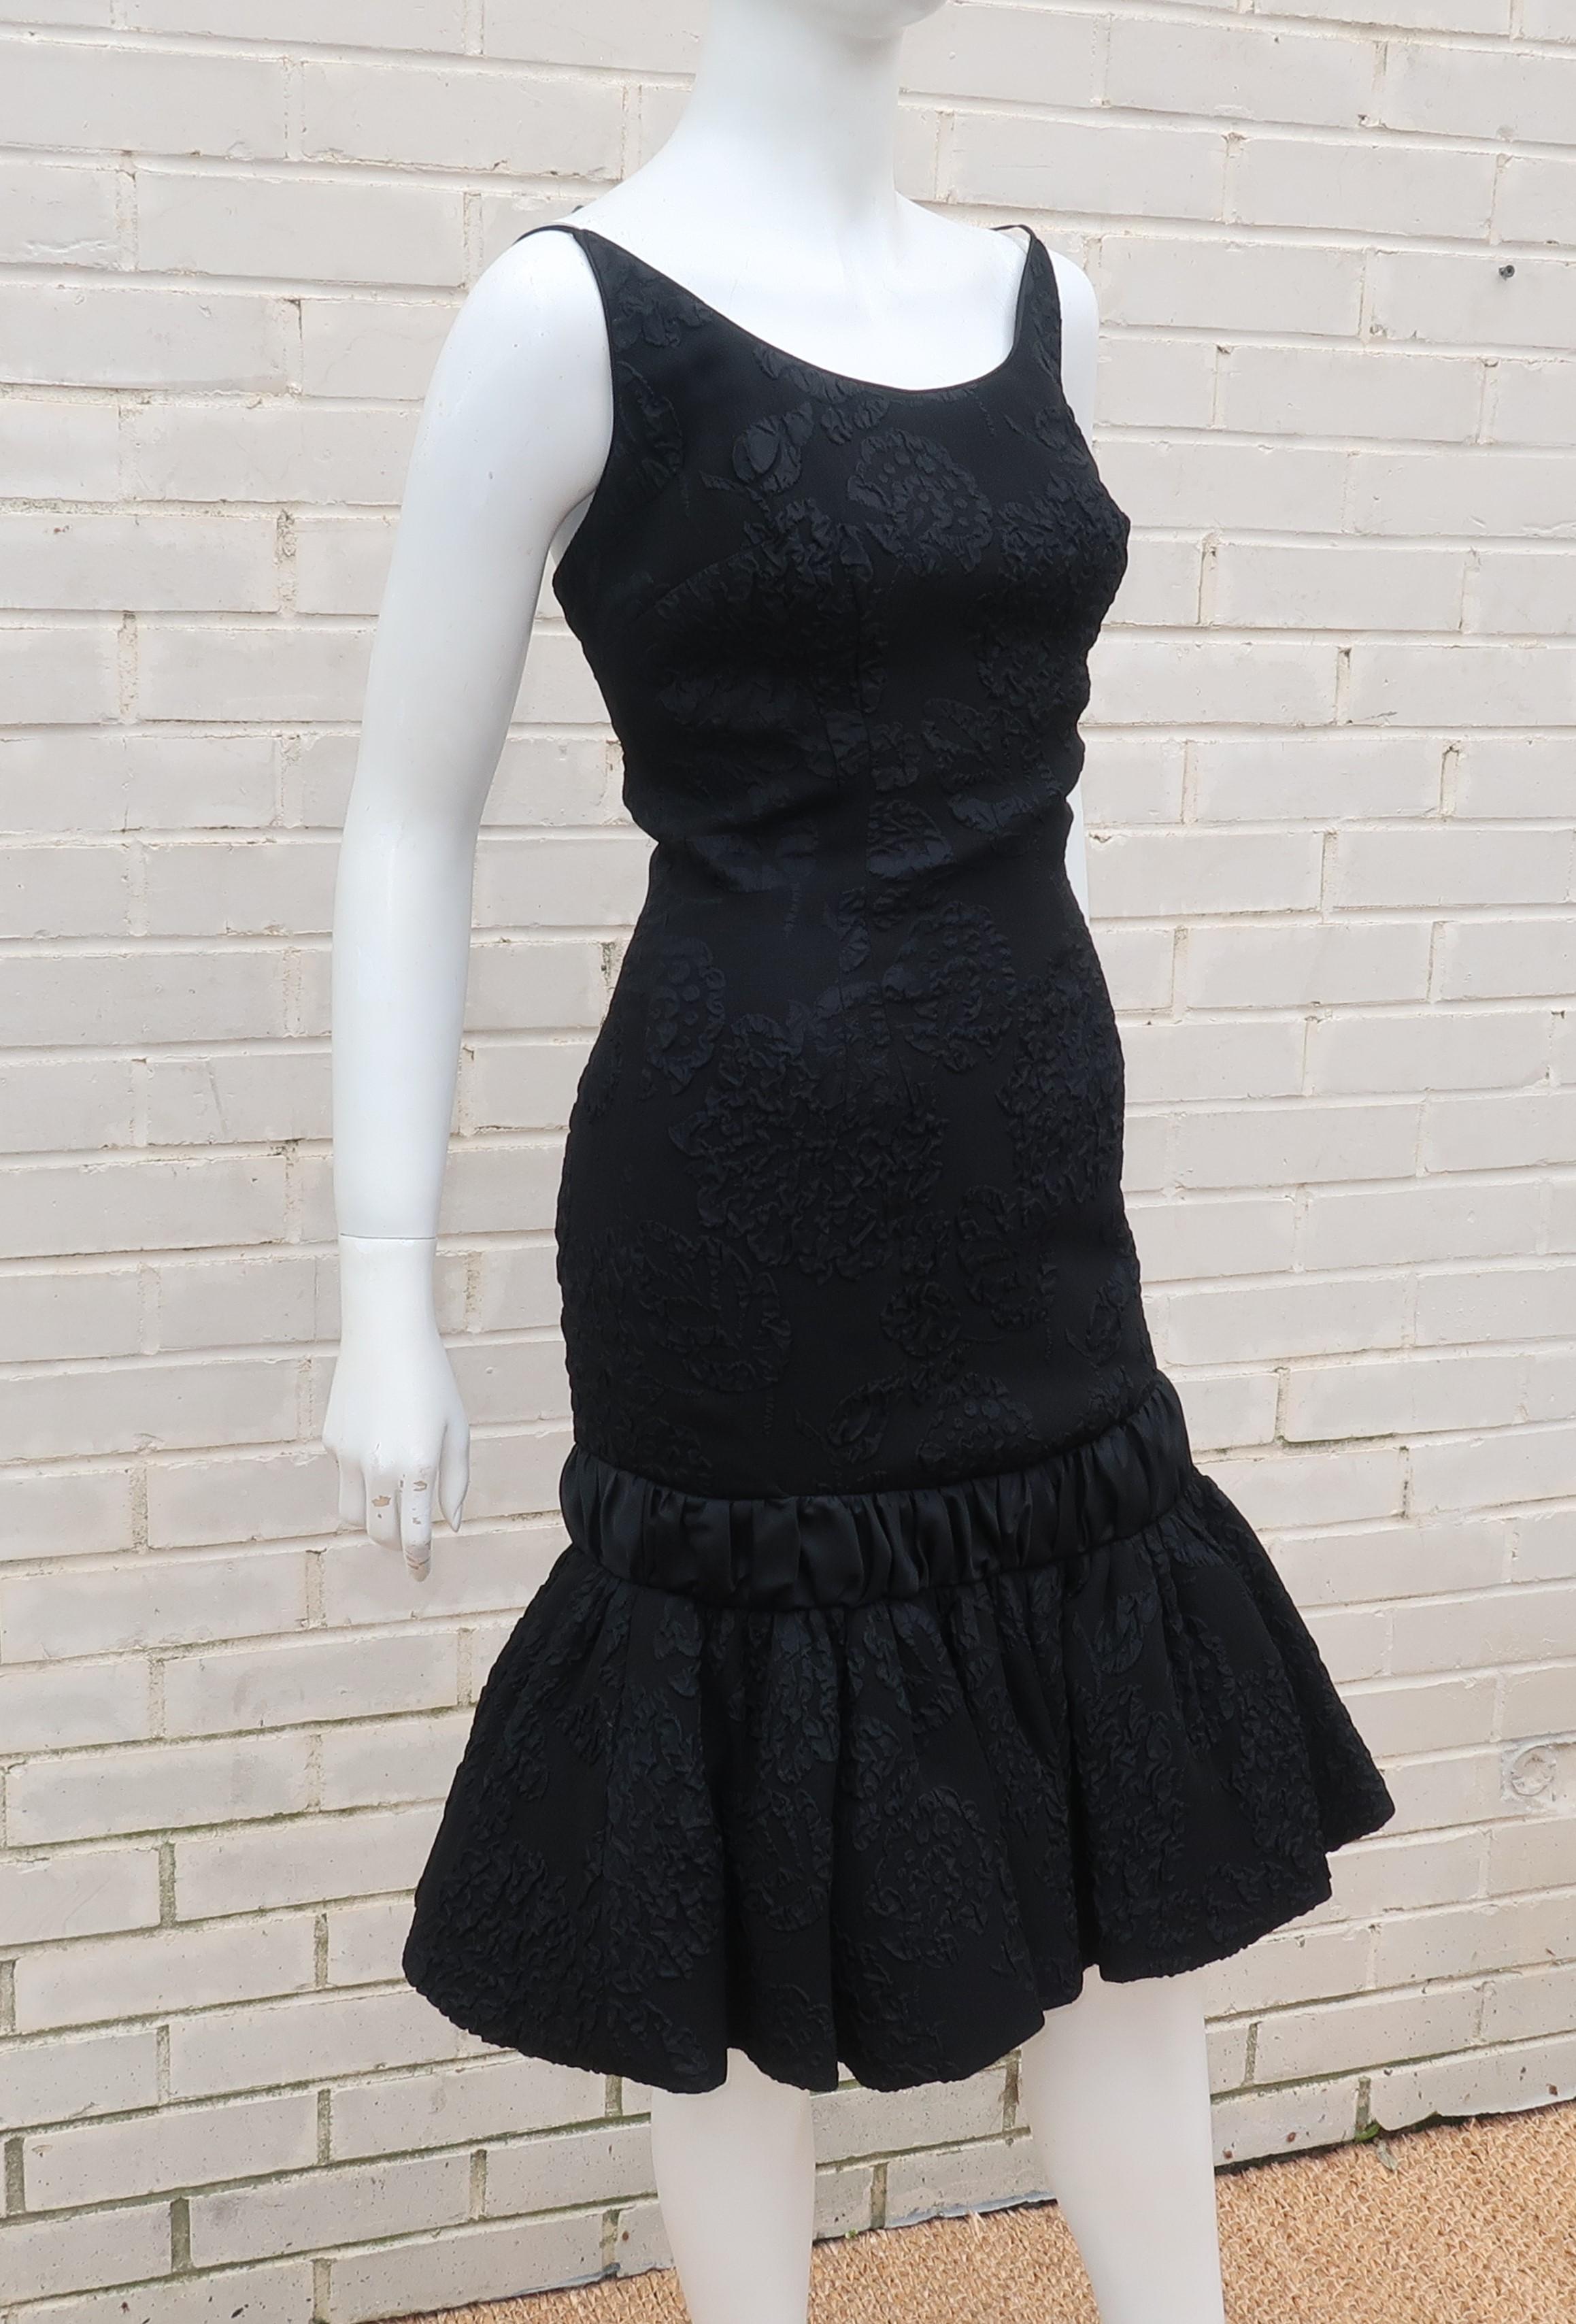 Neal of California C.1960 Black Jacquard Cocktail Dress With Ruffled Hem For Sale 2